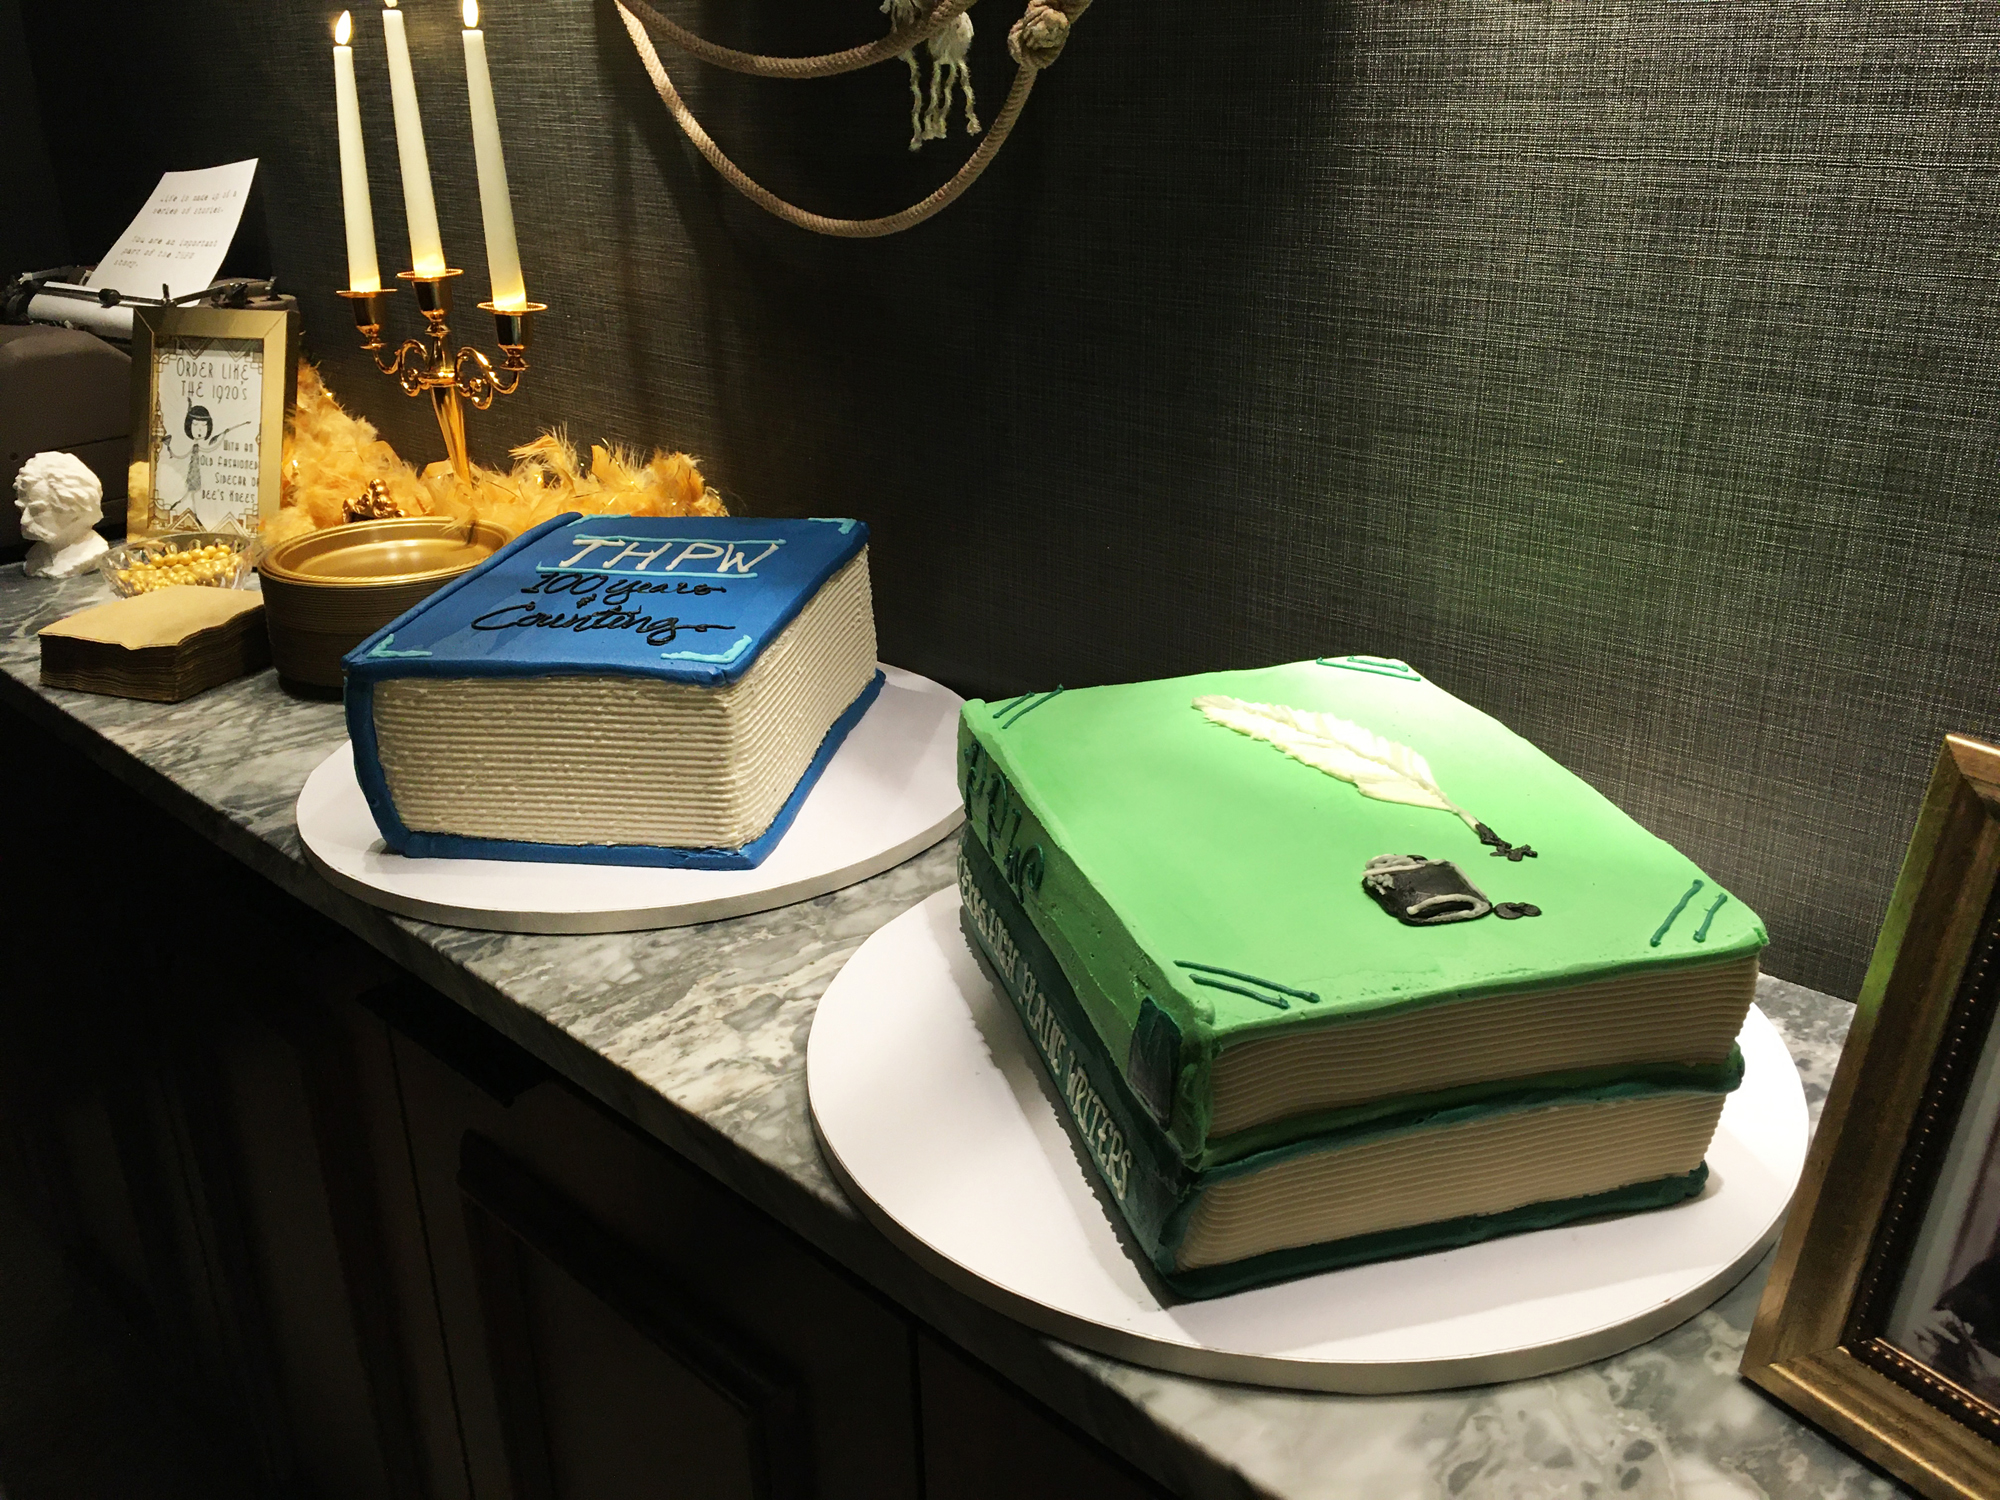 Book cakes with vintage library themed decor that includes a typewriter, a candelabra, and a writer's bust.